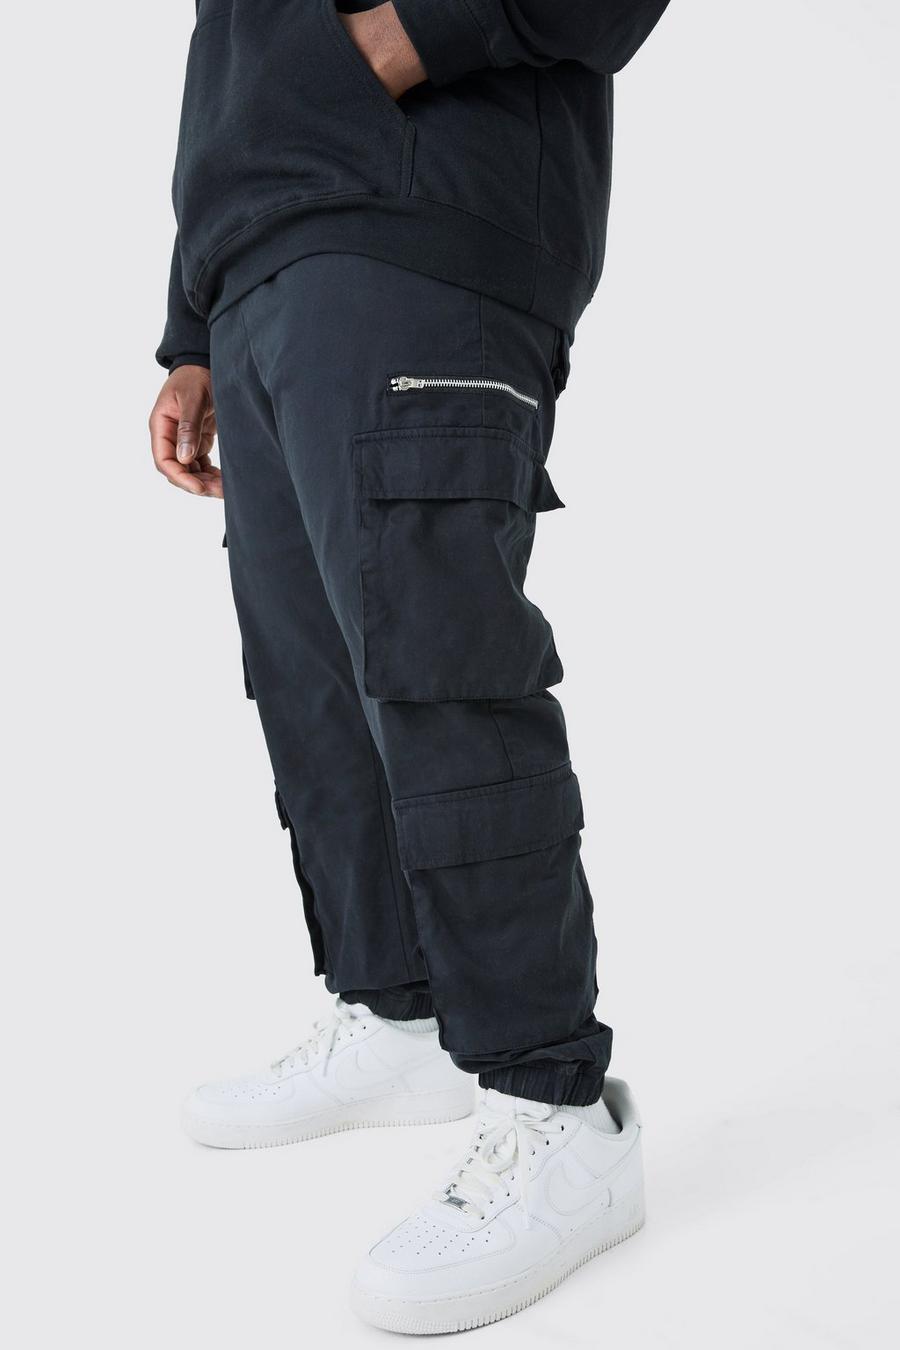 Black Plus Slim Fit Extended Drawcord Cargo per Trouser image number 1